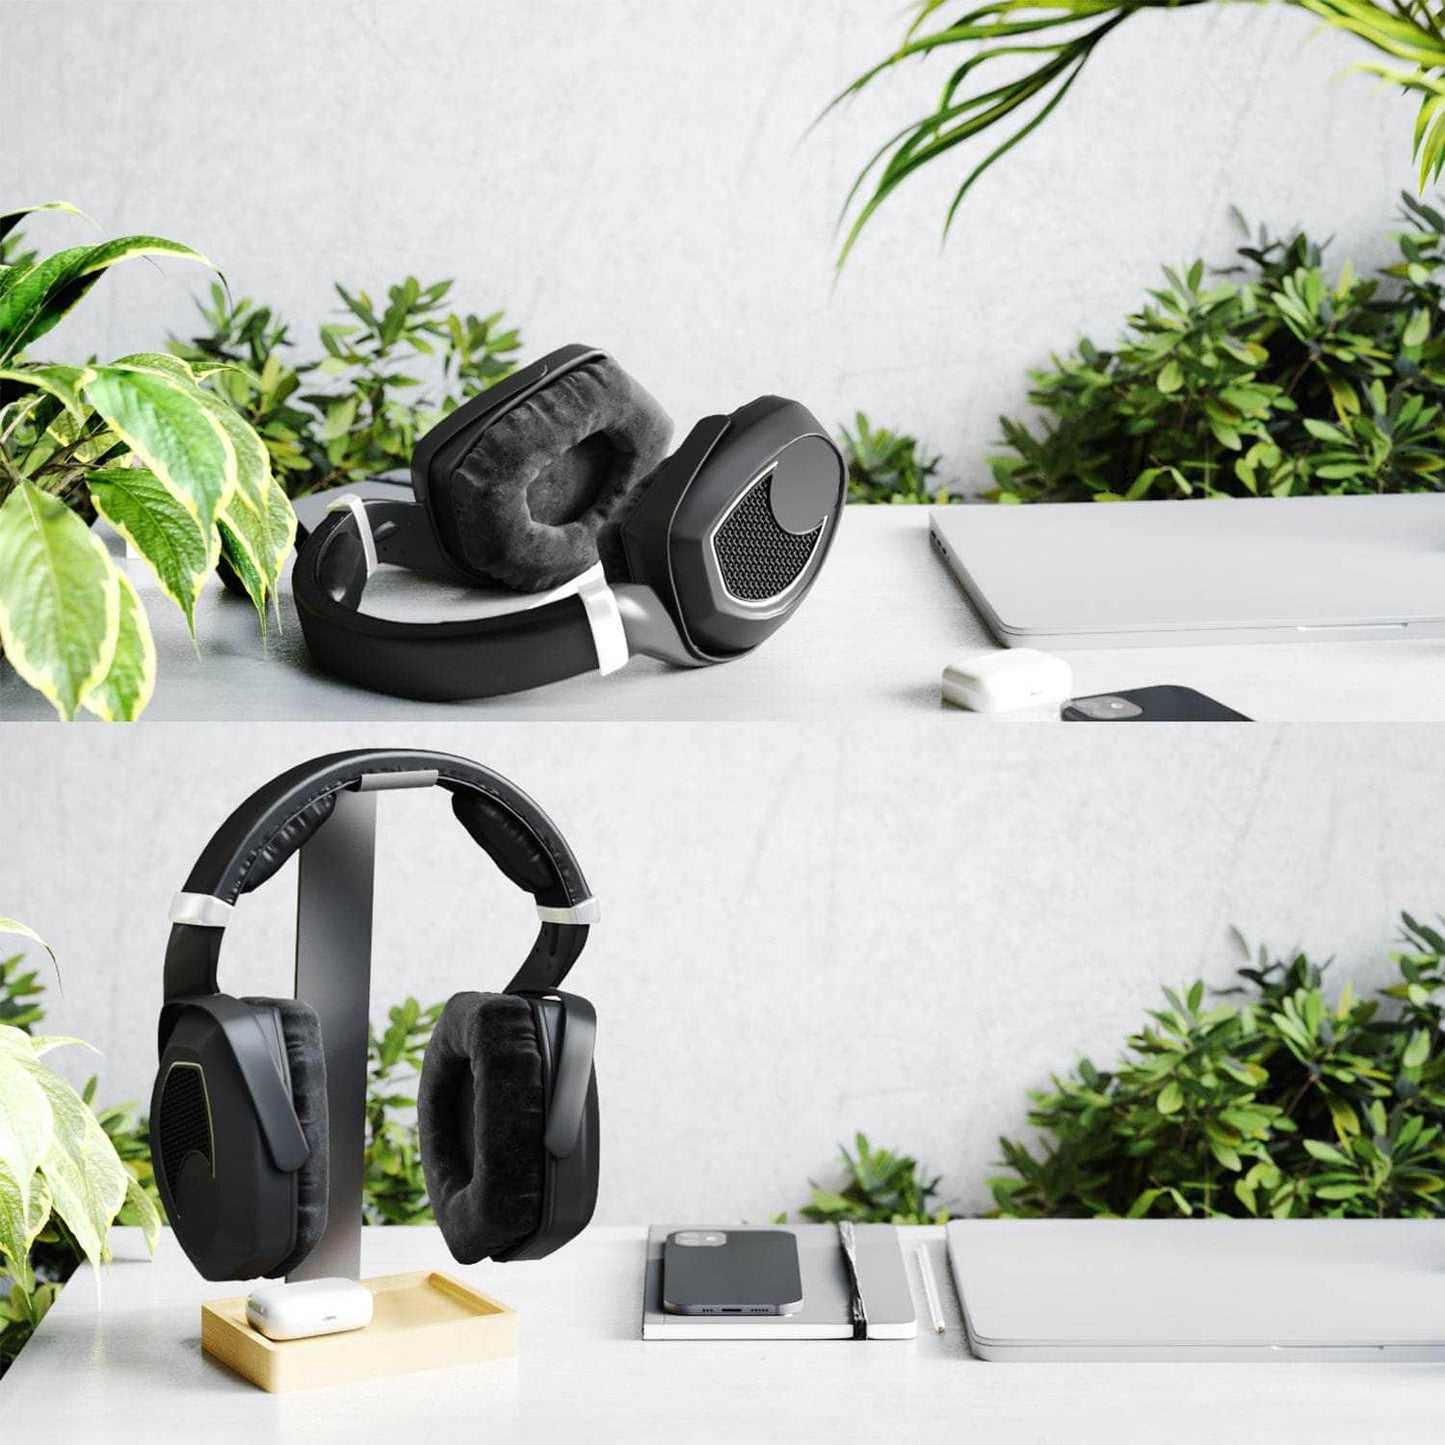 KD Essentials - Headset stand - bamboo and metal